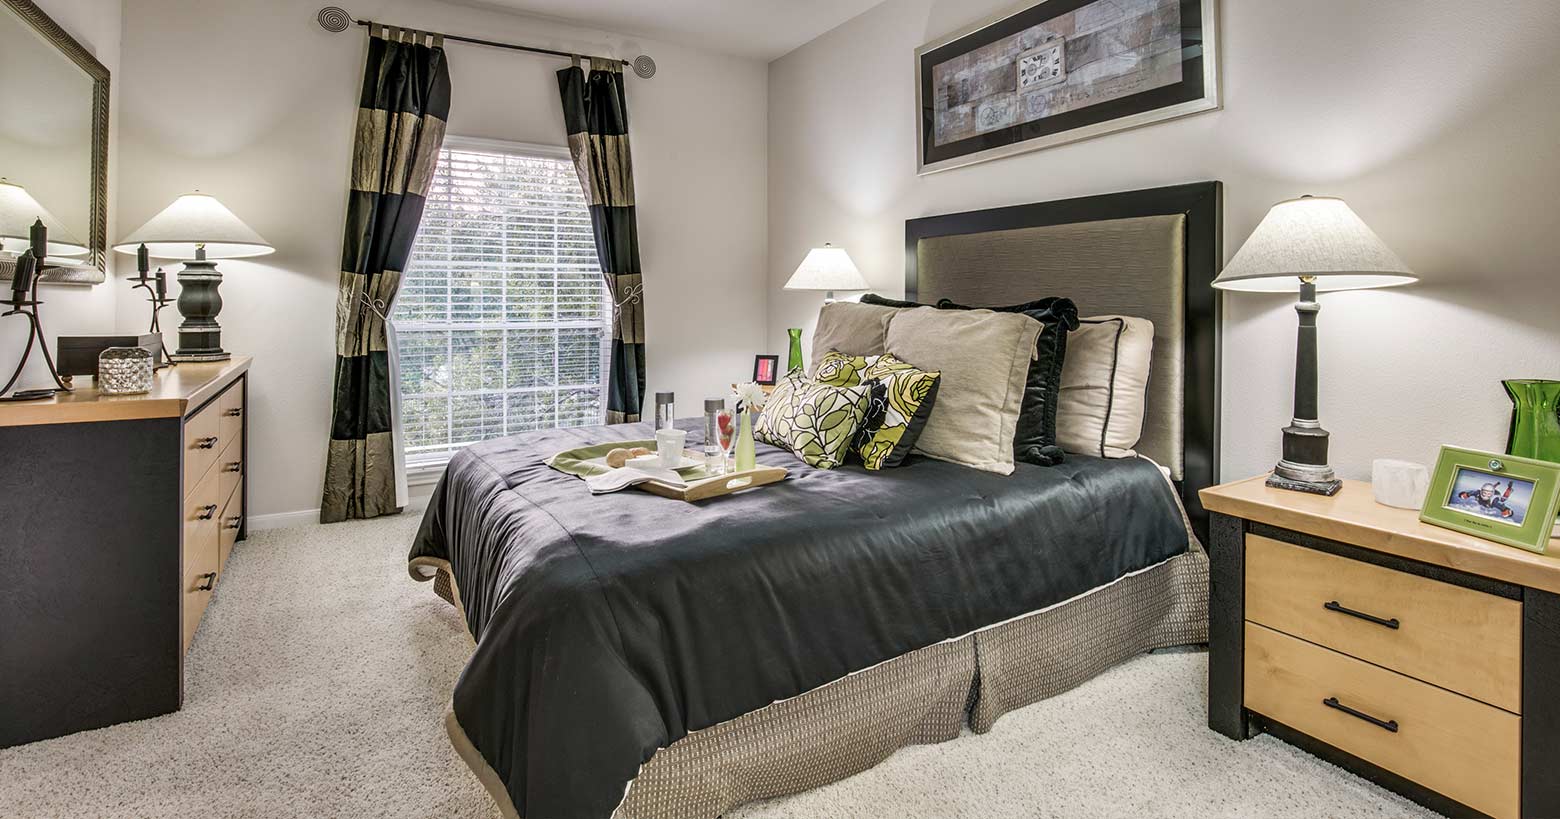 Our luxury apartments are a prime location for Houstonians